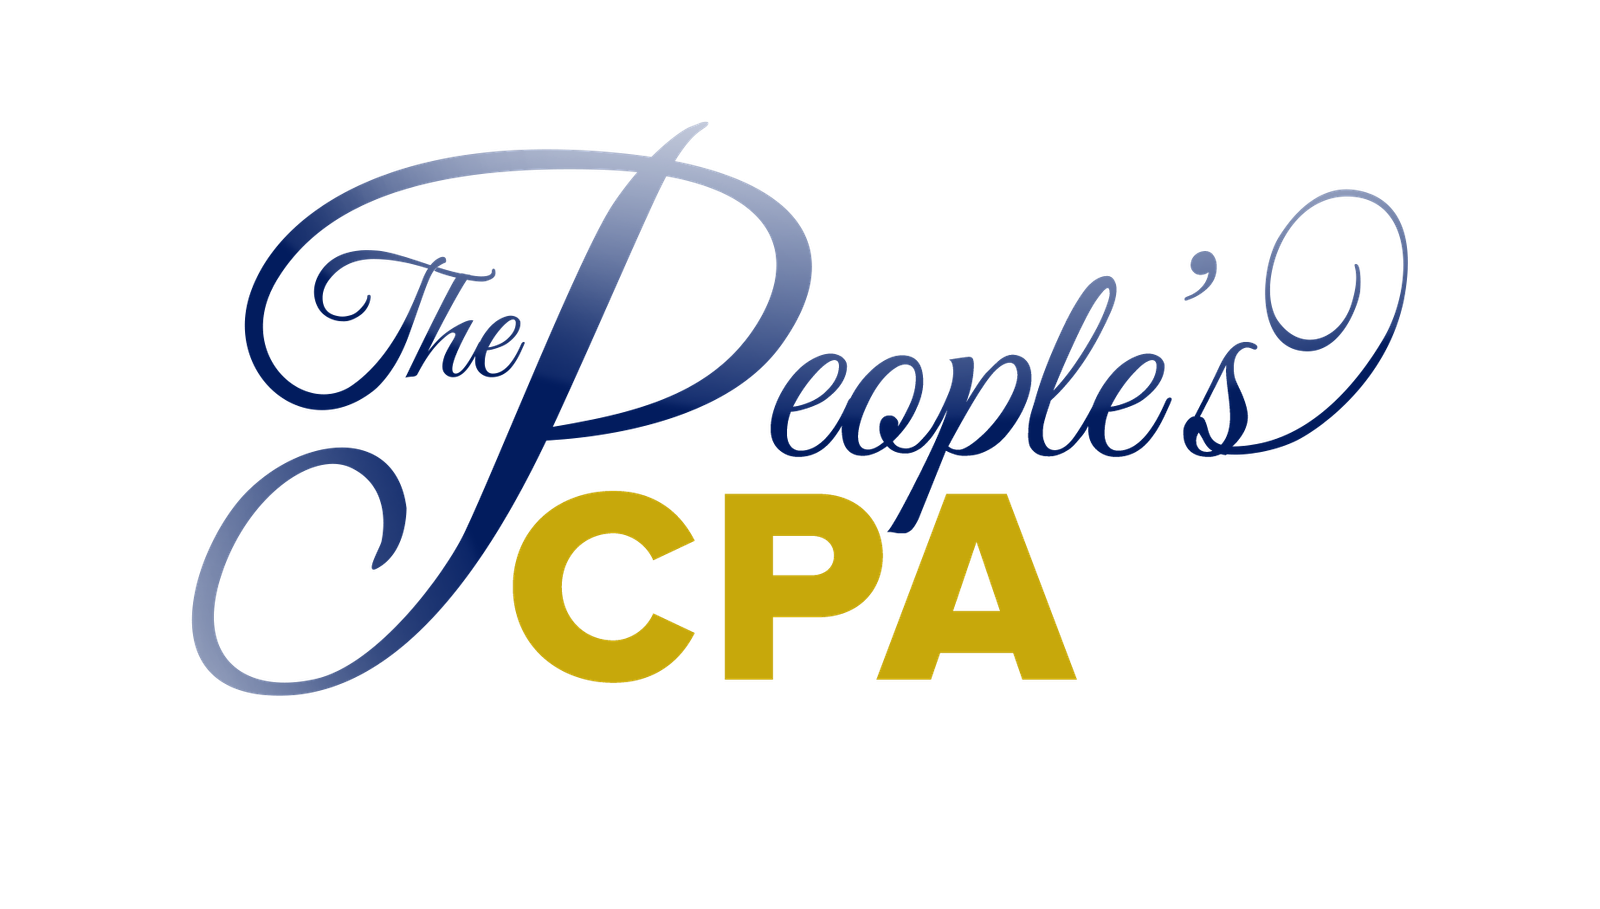 The People's CPA Logo